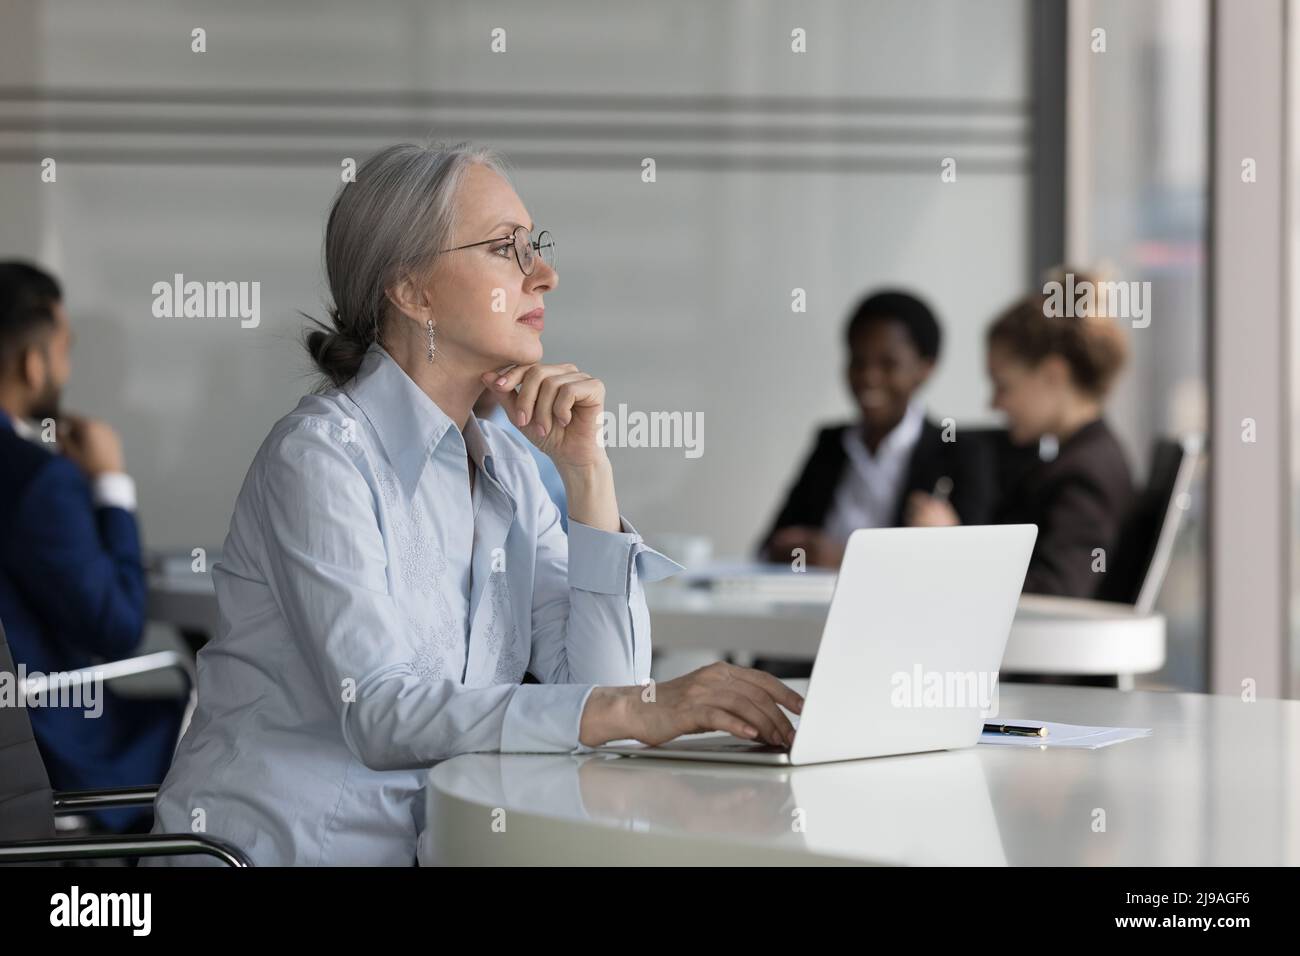 Thoughtful aged businesswoman sit at desk looks into distance Stock Photo